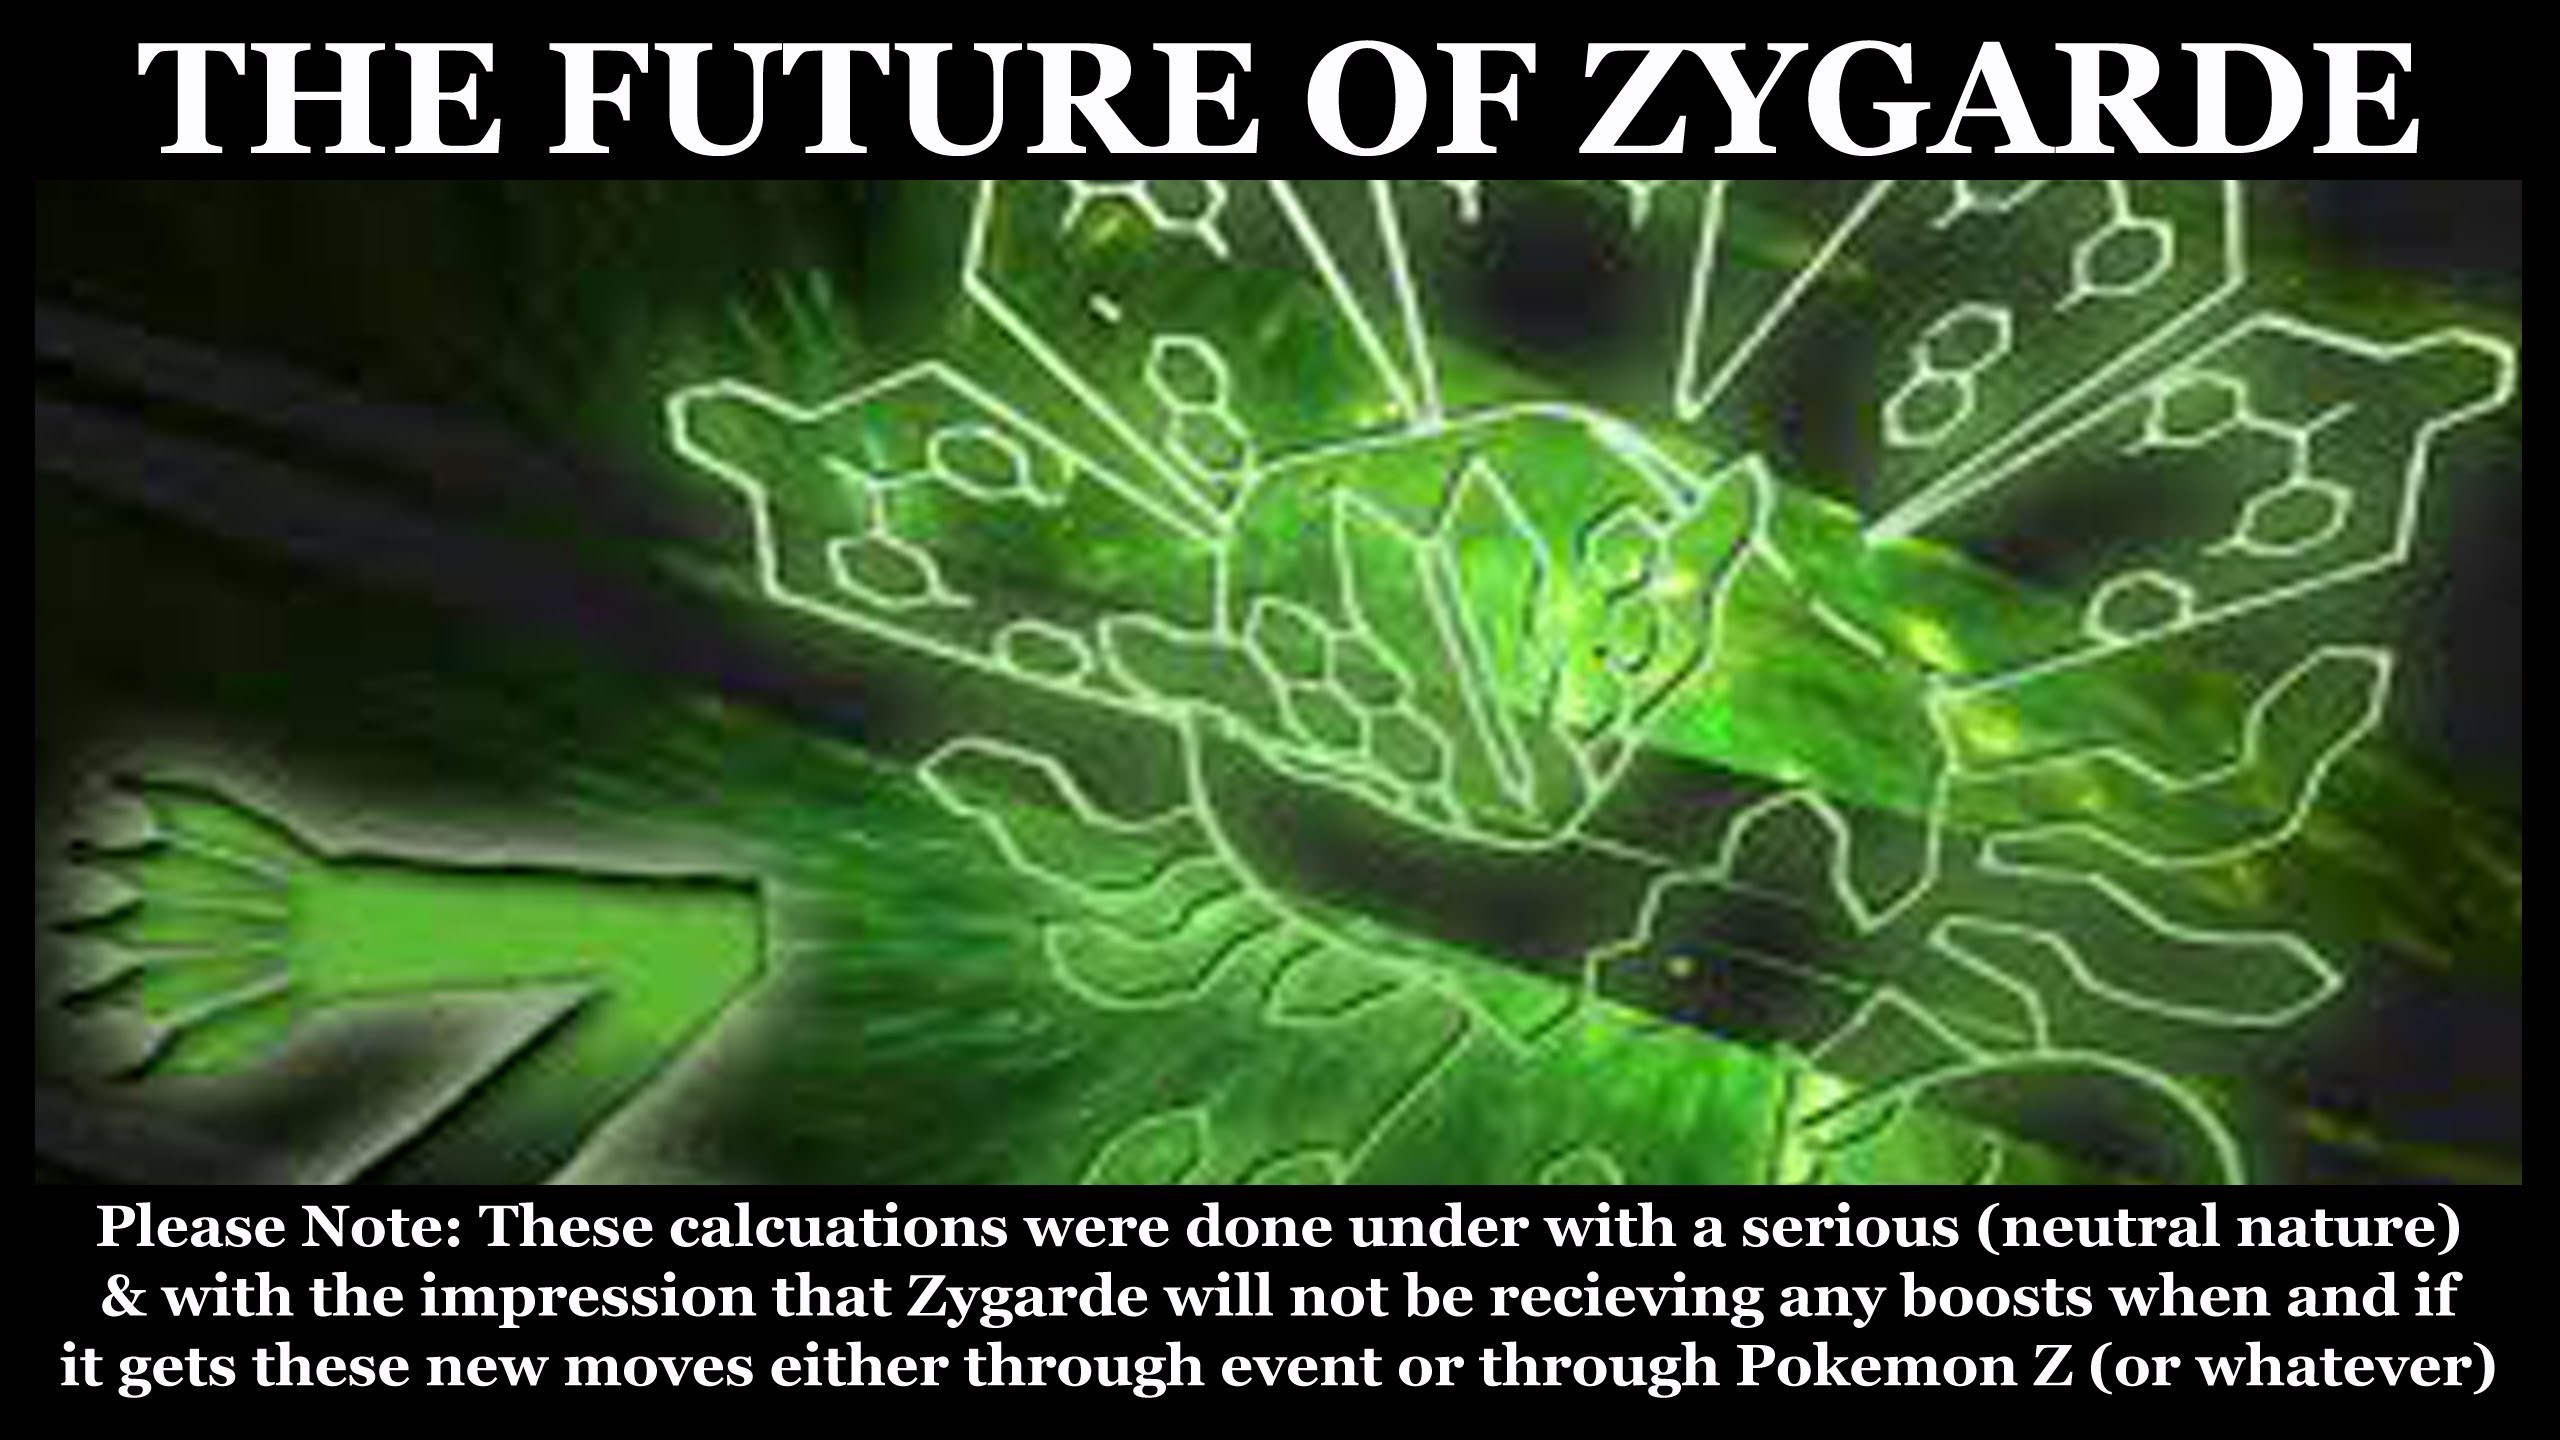 2560x1440 The Future of Zygarde - Competitive Analysis